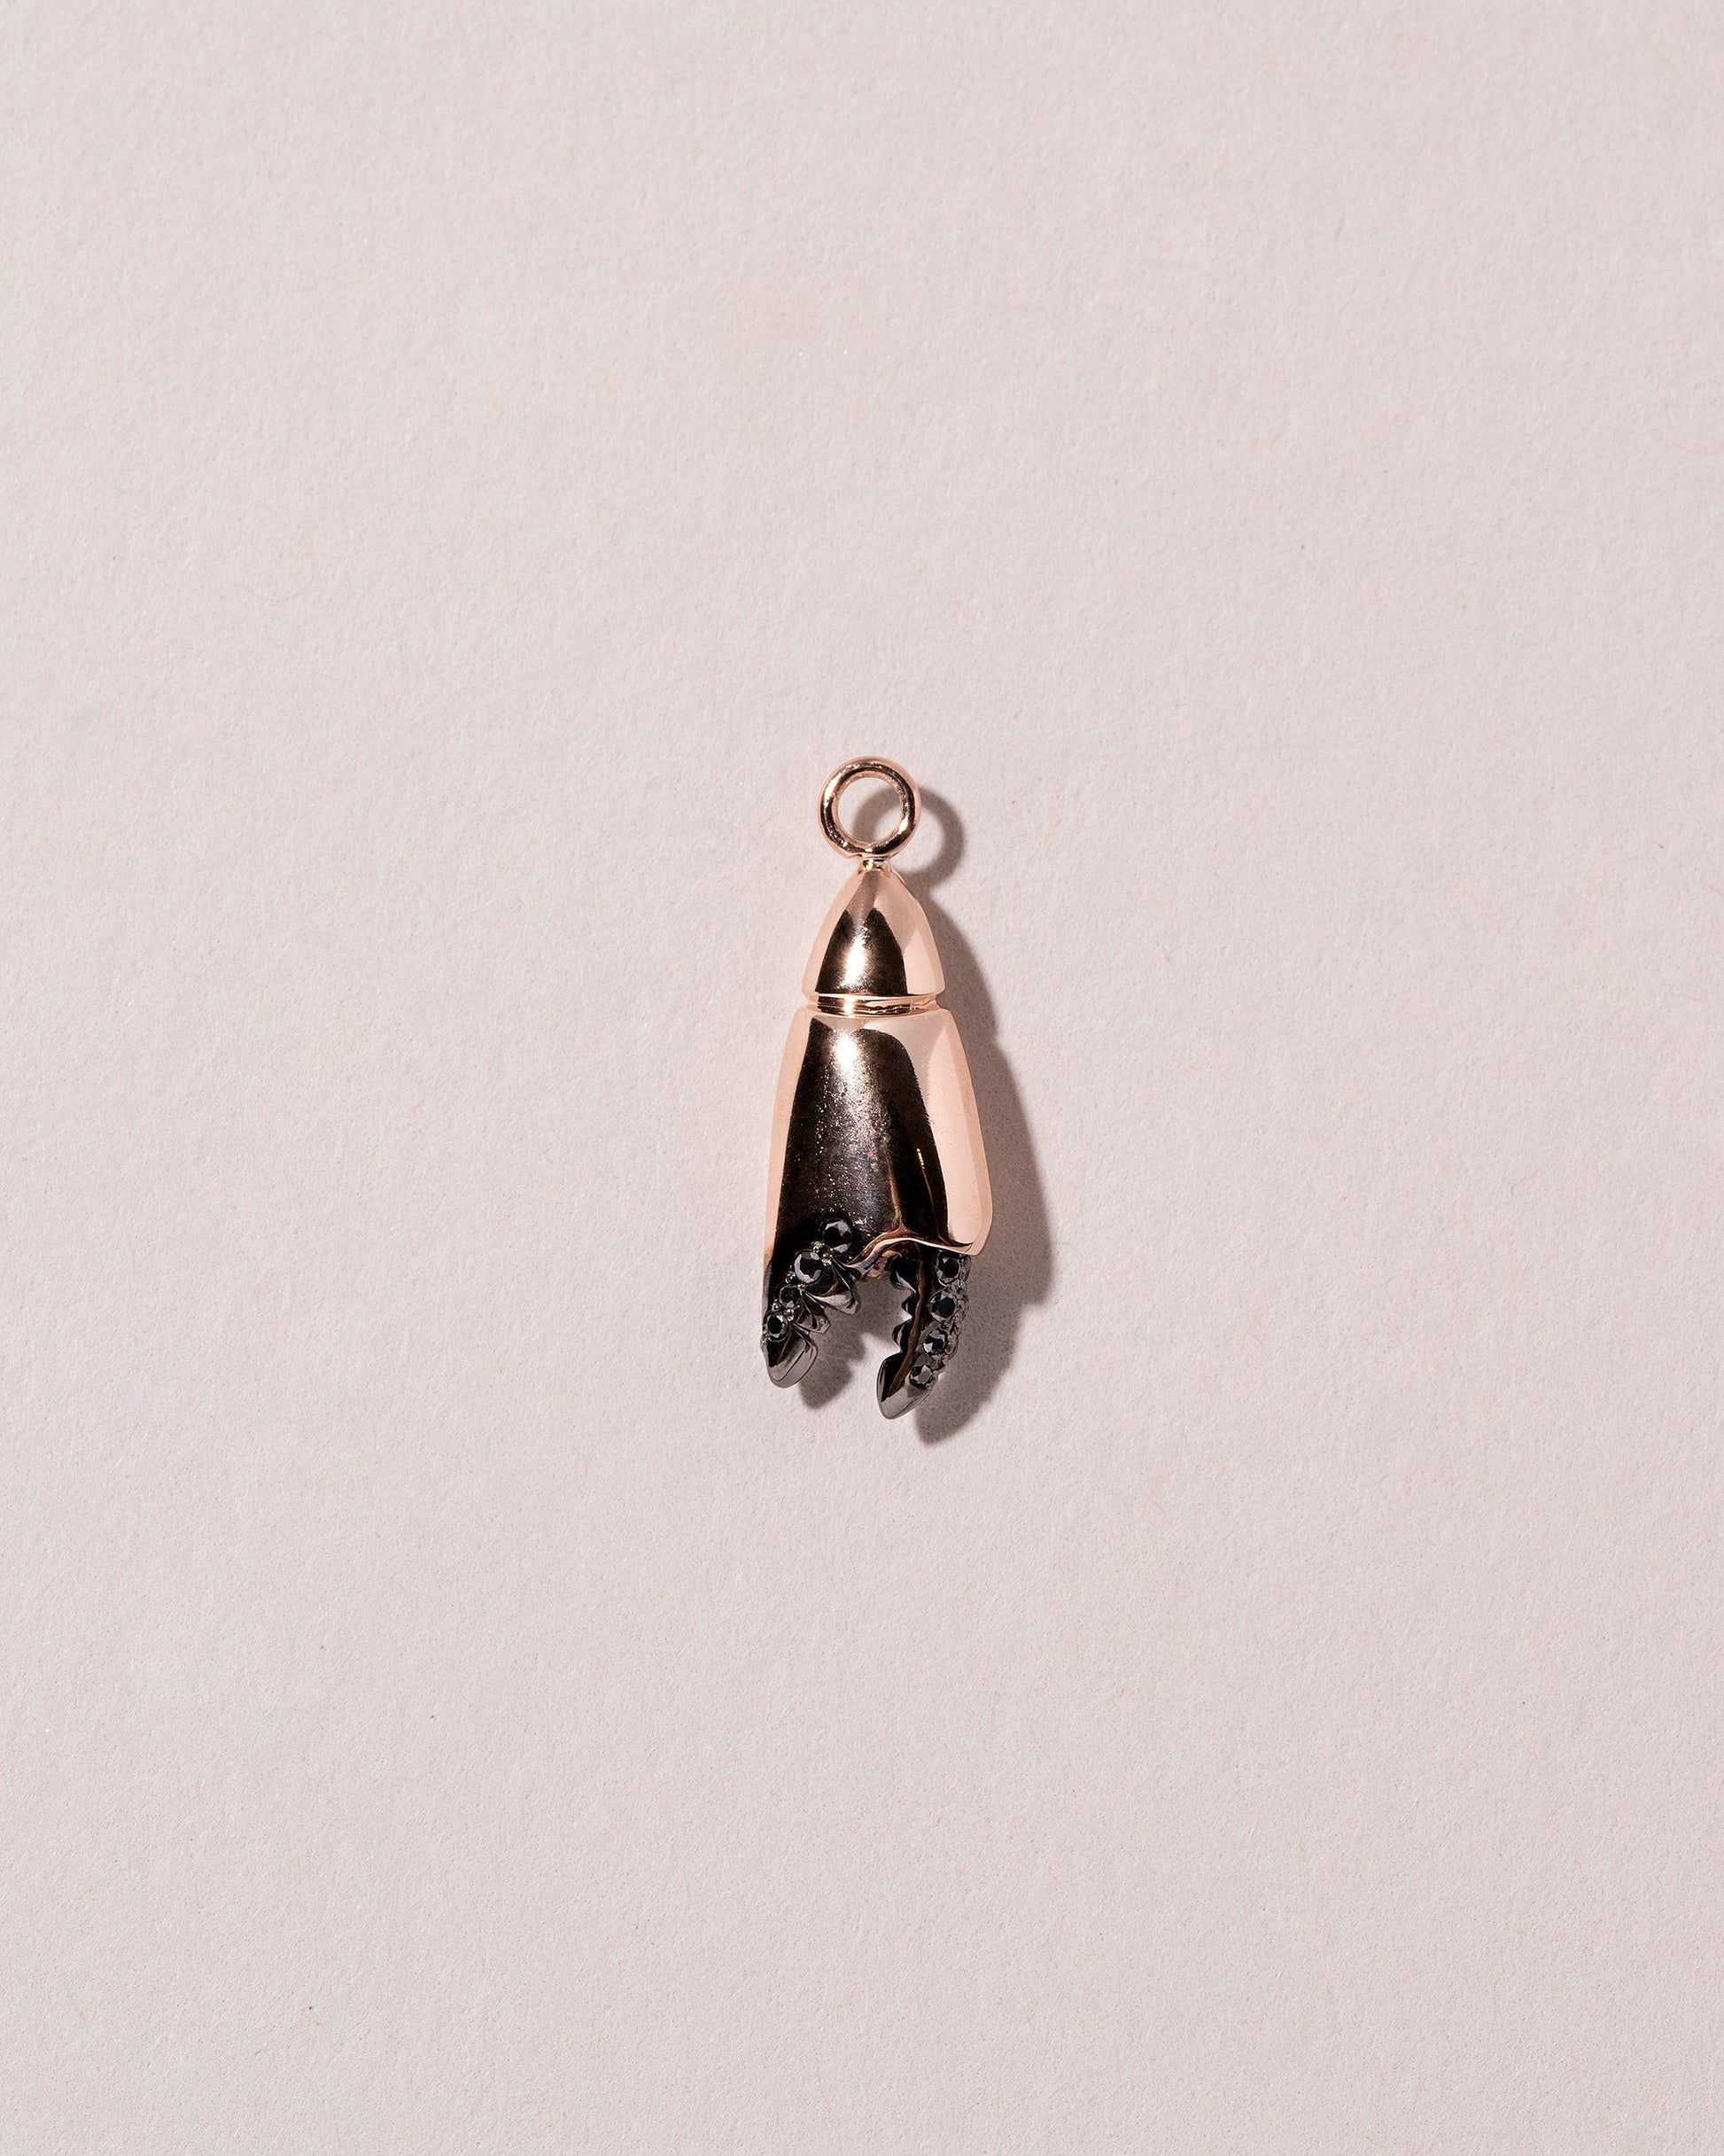  Stone Crab Claw Charm on light color background.